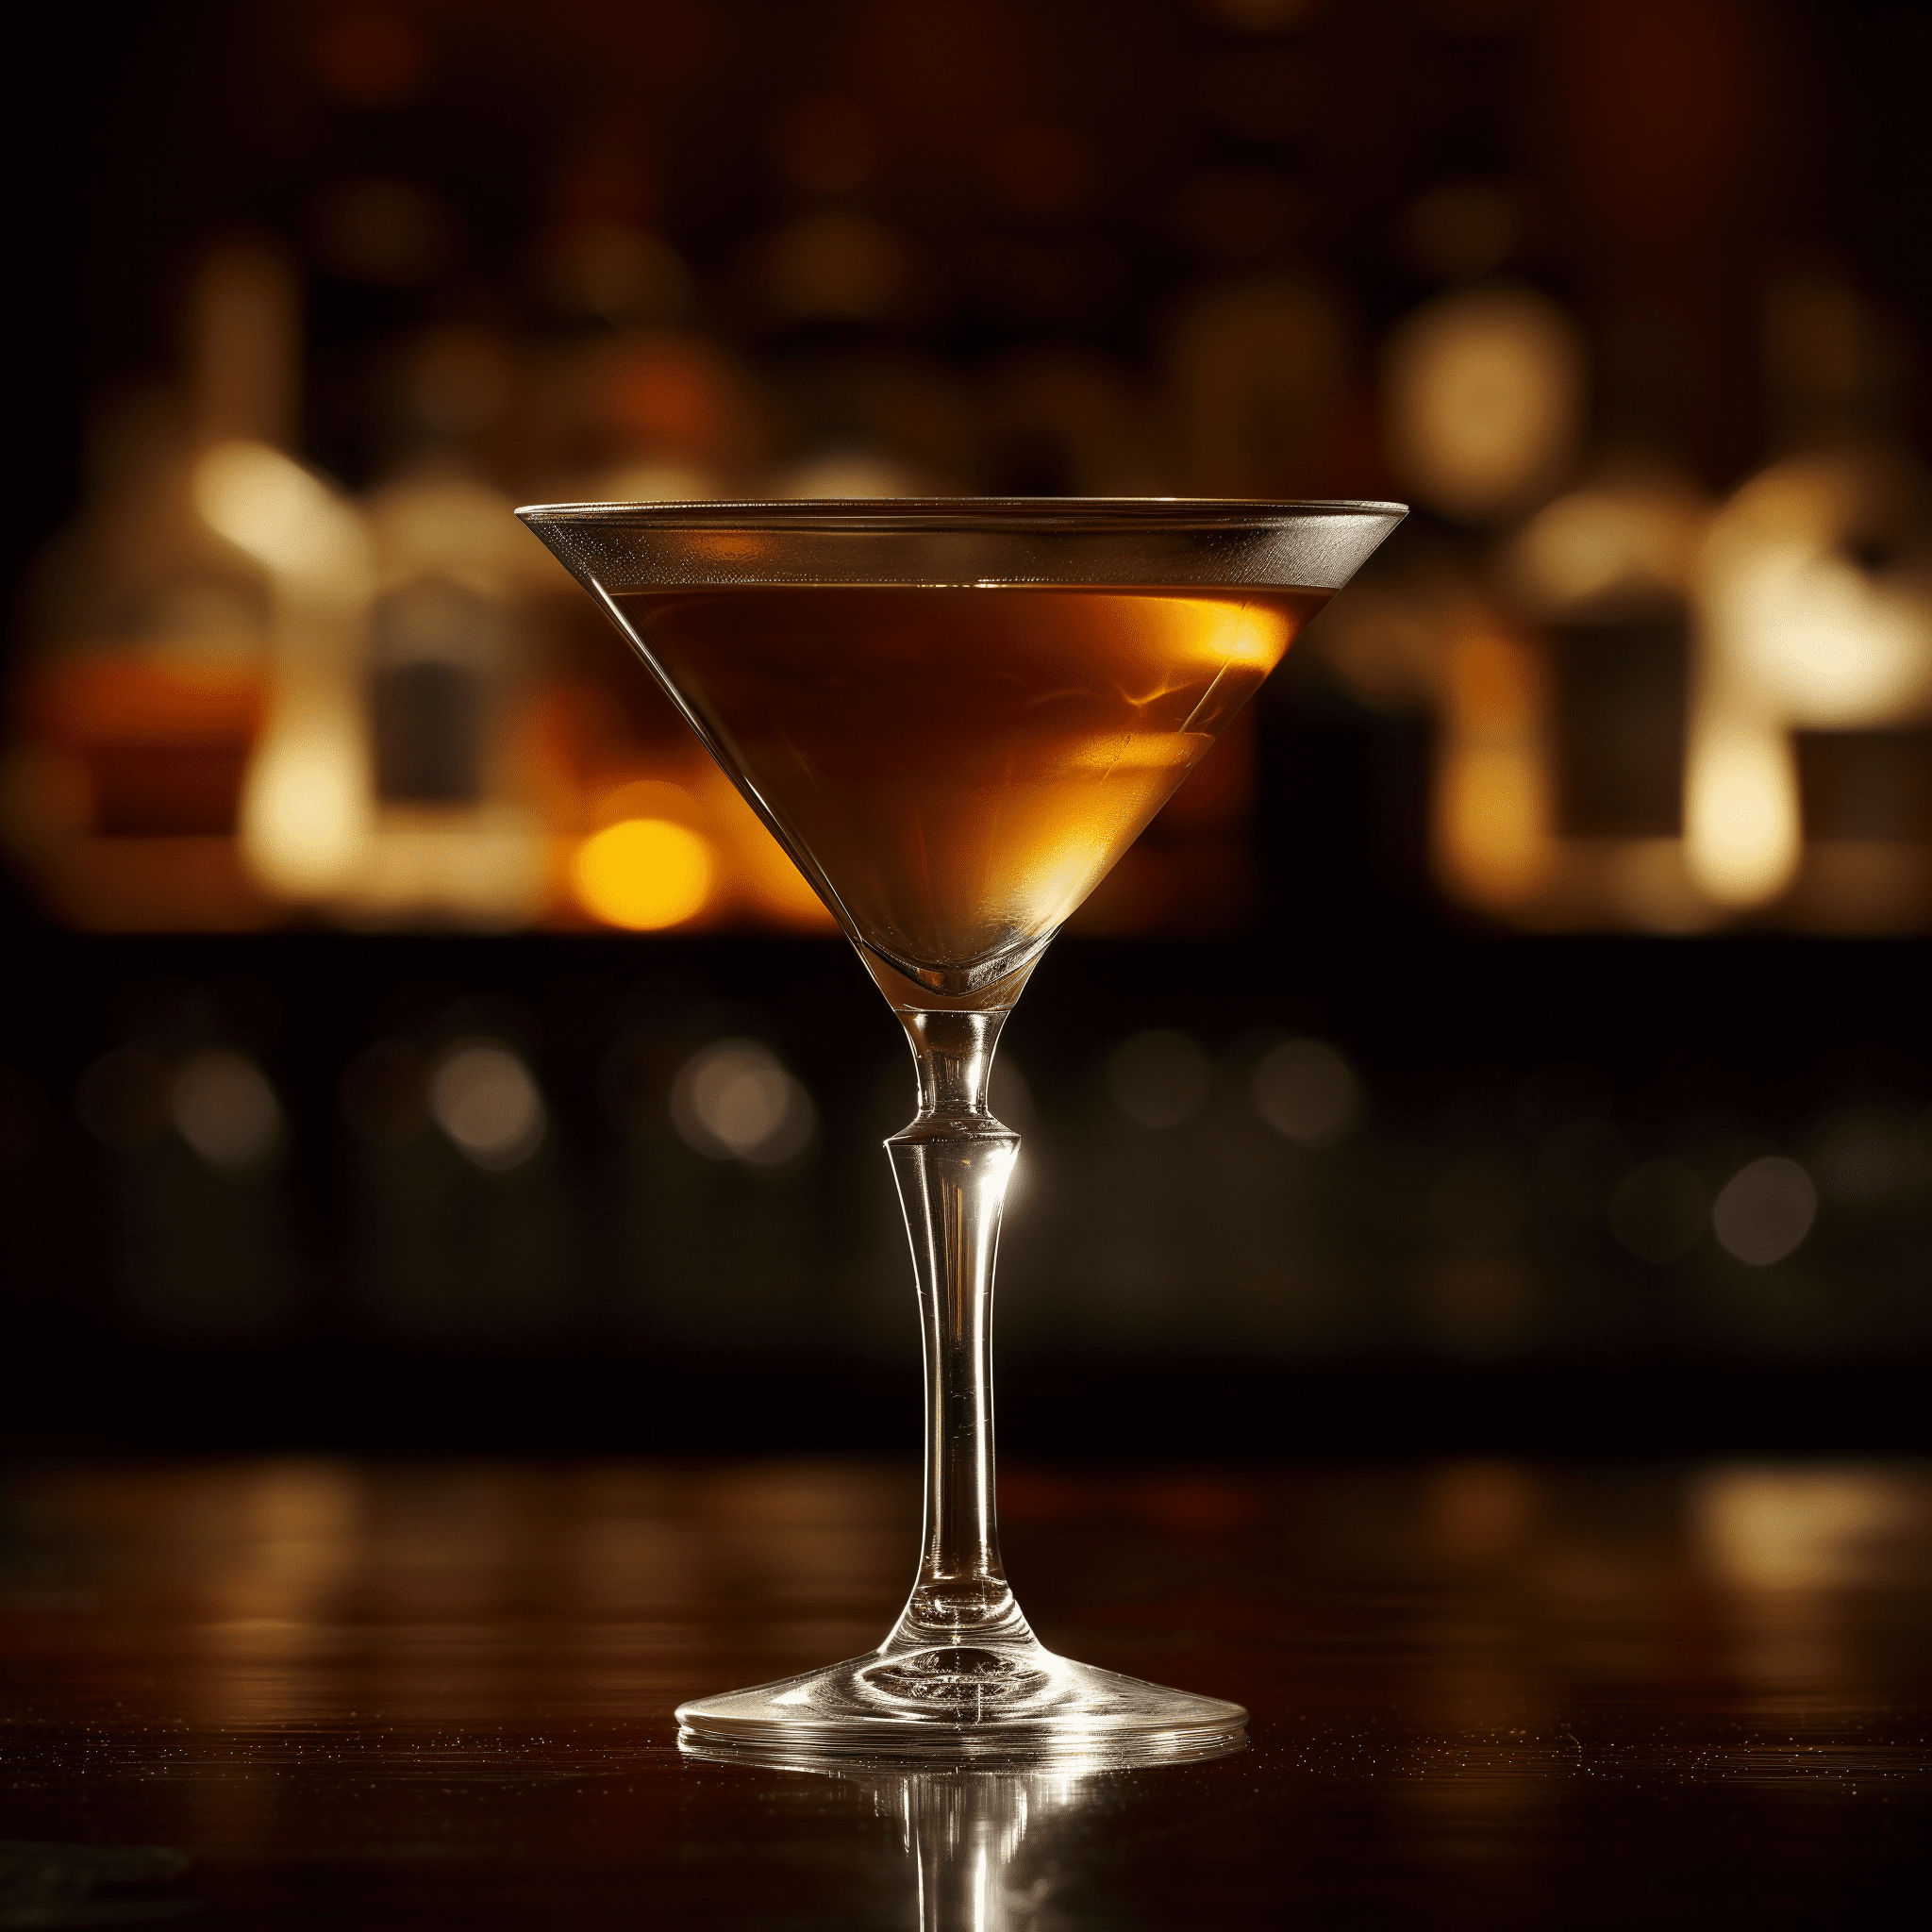 Dirty Martinez Cocktail Recipe - The Dirty Martinez offers a briny, slightly salty taste with a rich herbal undertone from the gin. It's robust, complex, and has a savory finish that lingers on the palate.